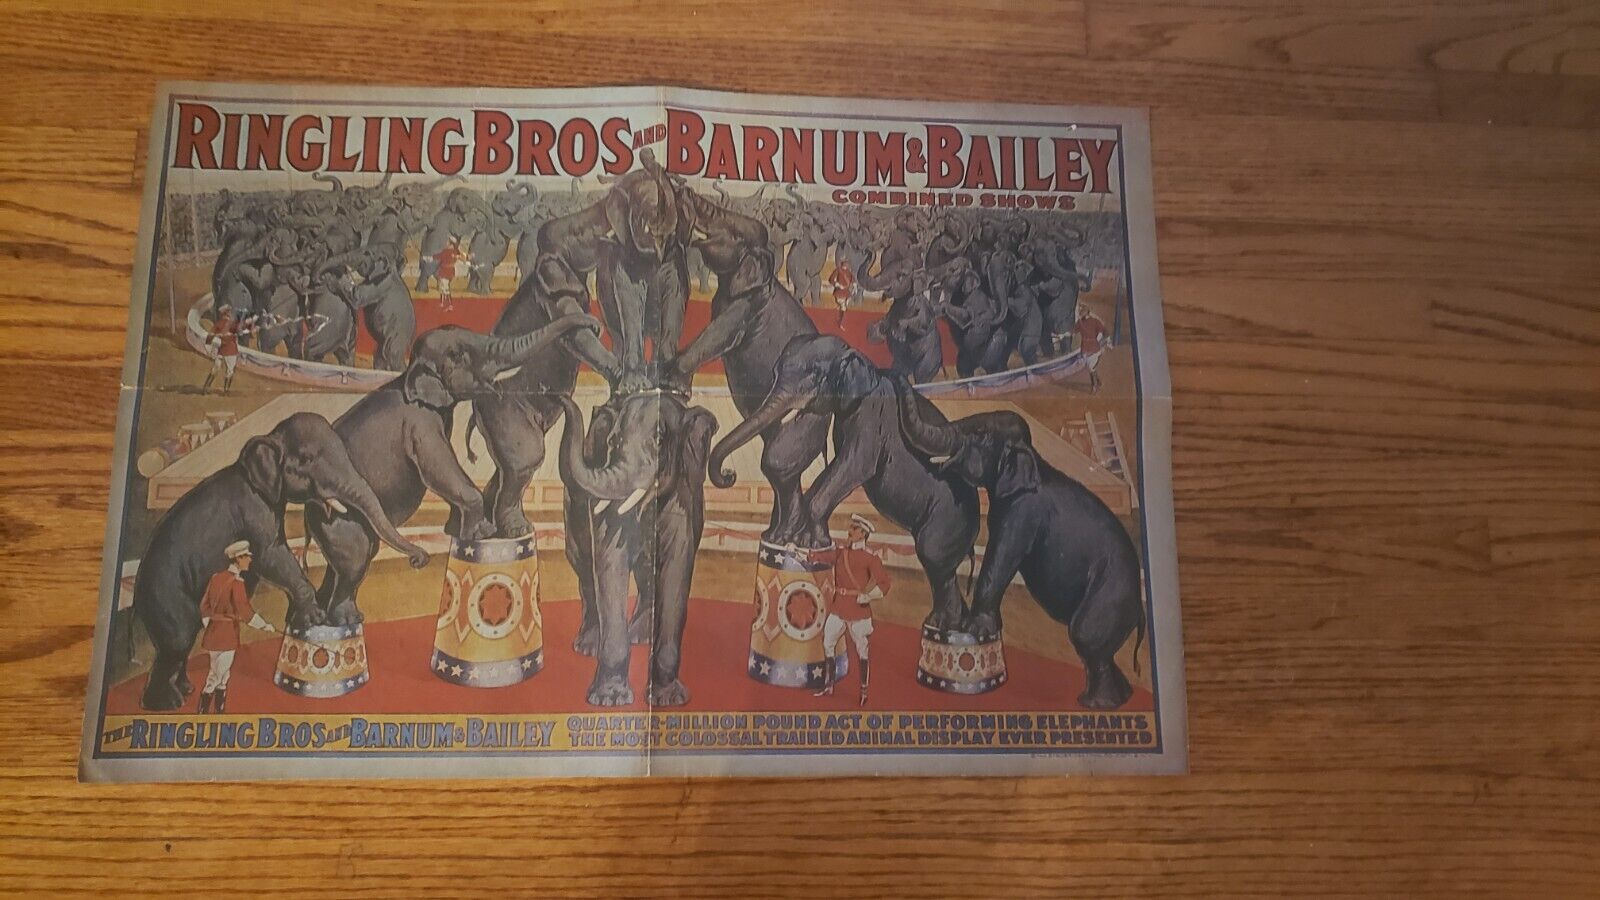 Original 1927 Ringling Brothers Barnum Bailey Circus Poster Combined Shows 